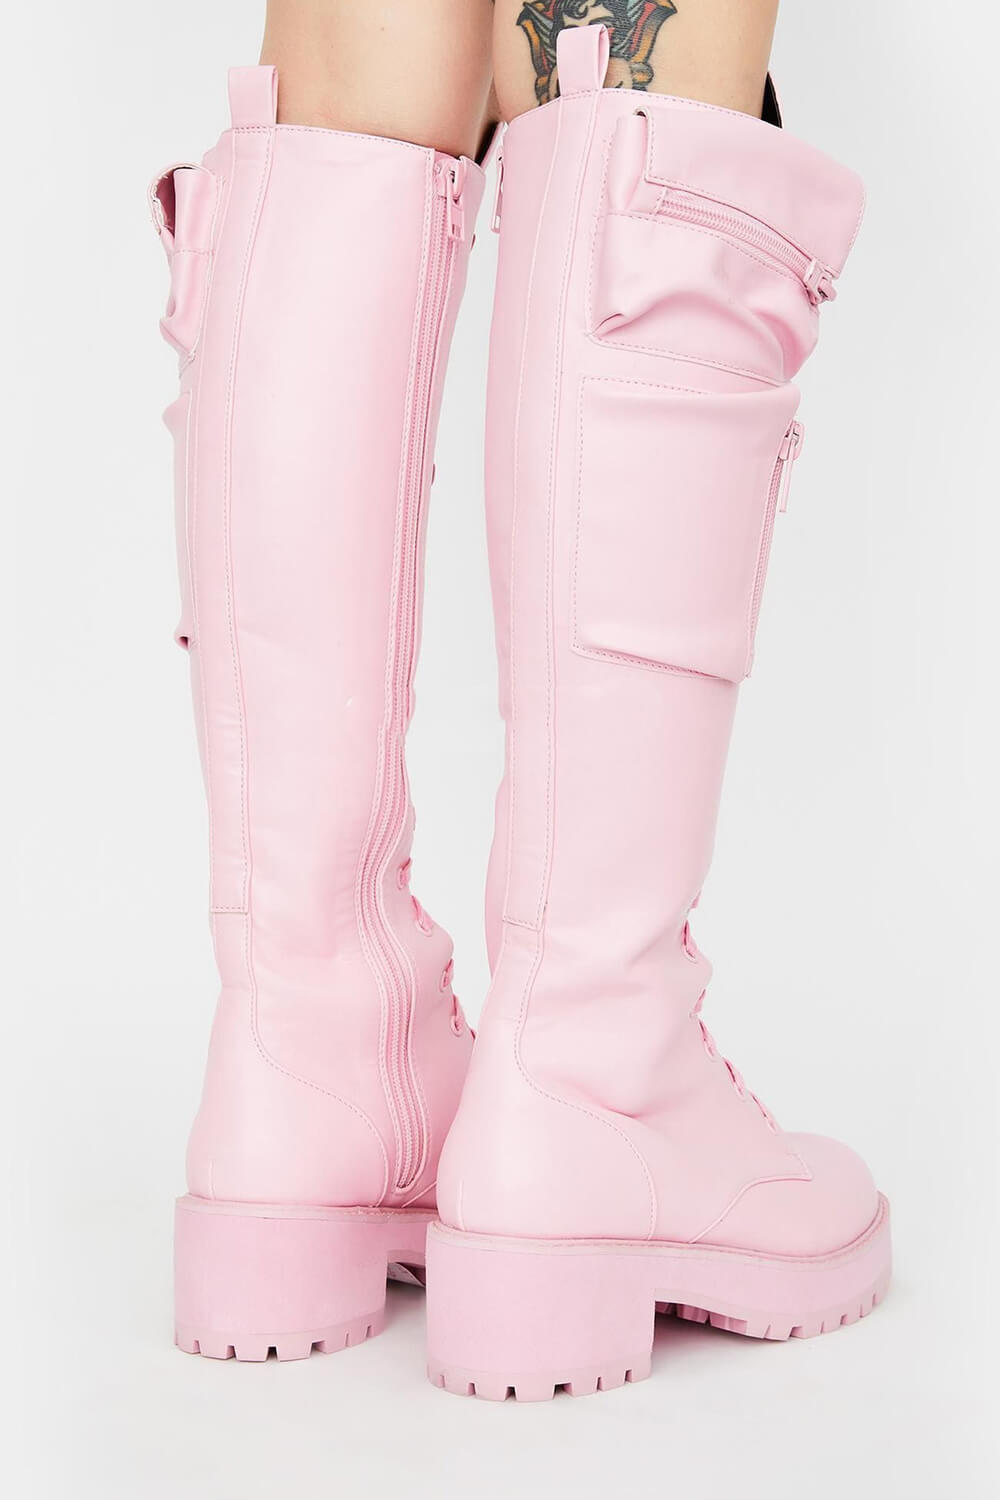 Lace Up Pocket Detail Chunky Knee High Combat Boots - Pink